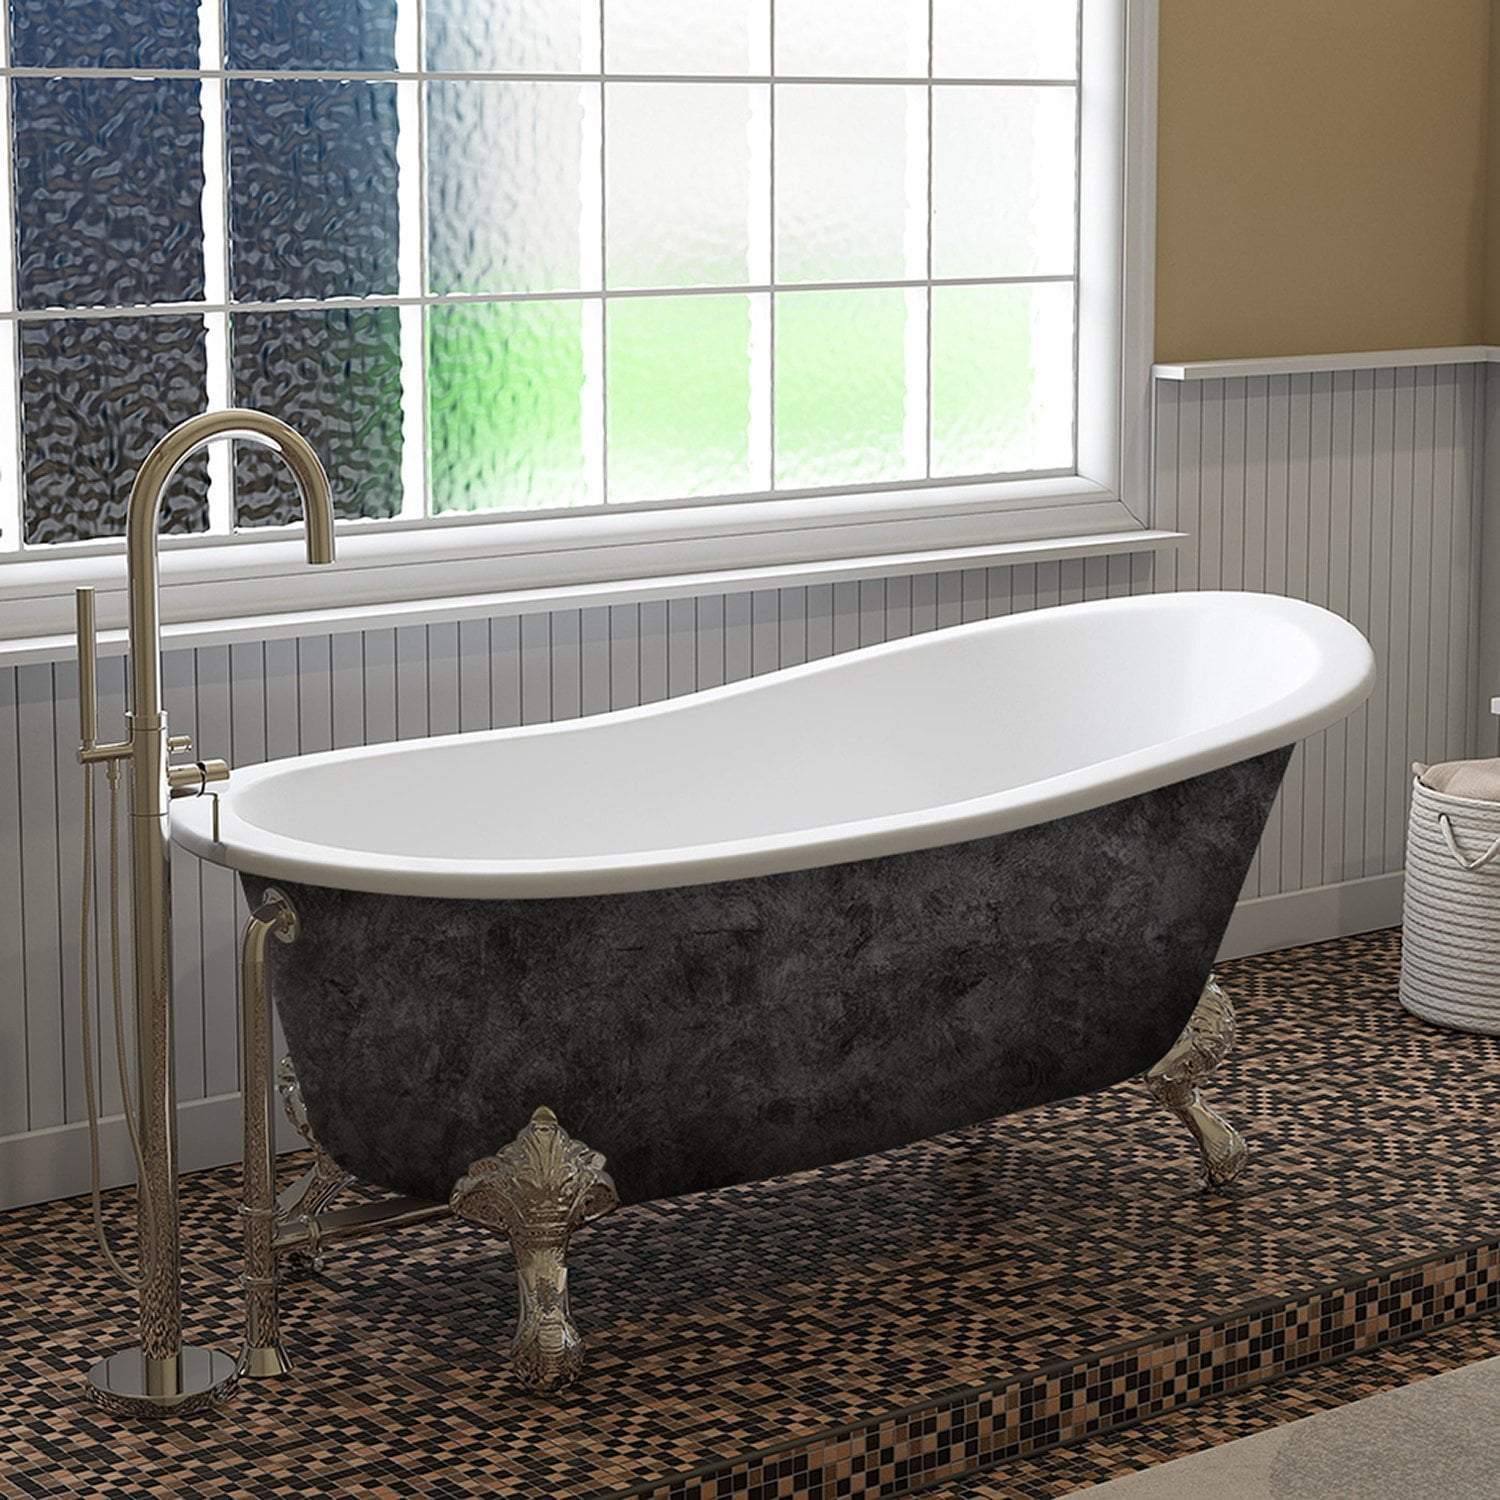 Scorched Platinum 67” x 30” Cast Iron Slipper Bathtub with” No Faucet Holes and Polished Chrome Ball and Claw Feet